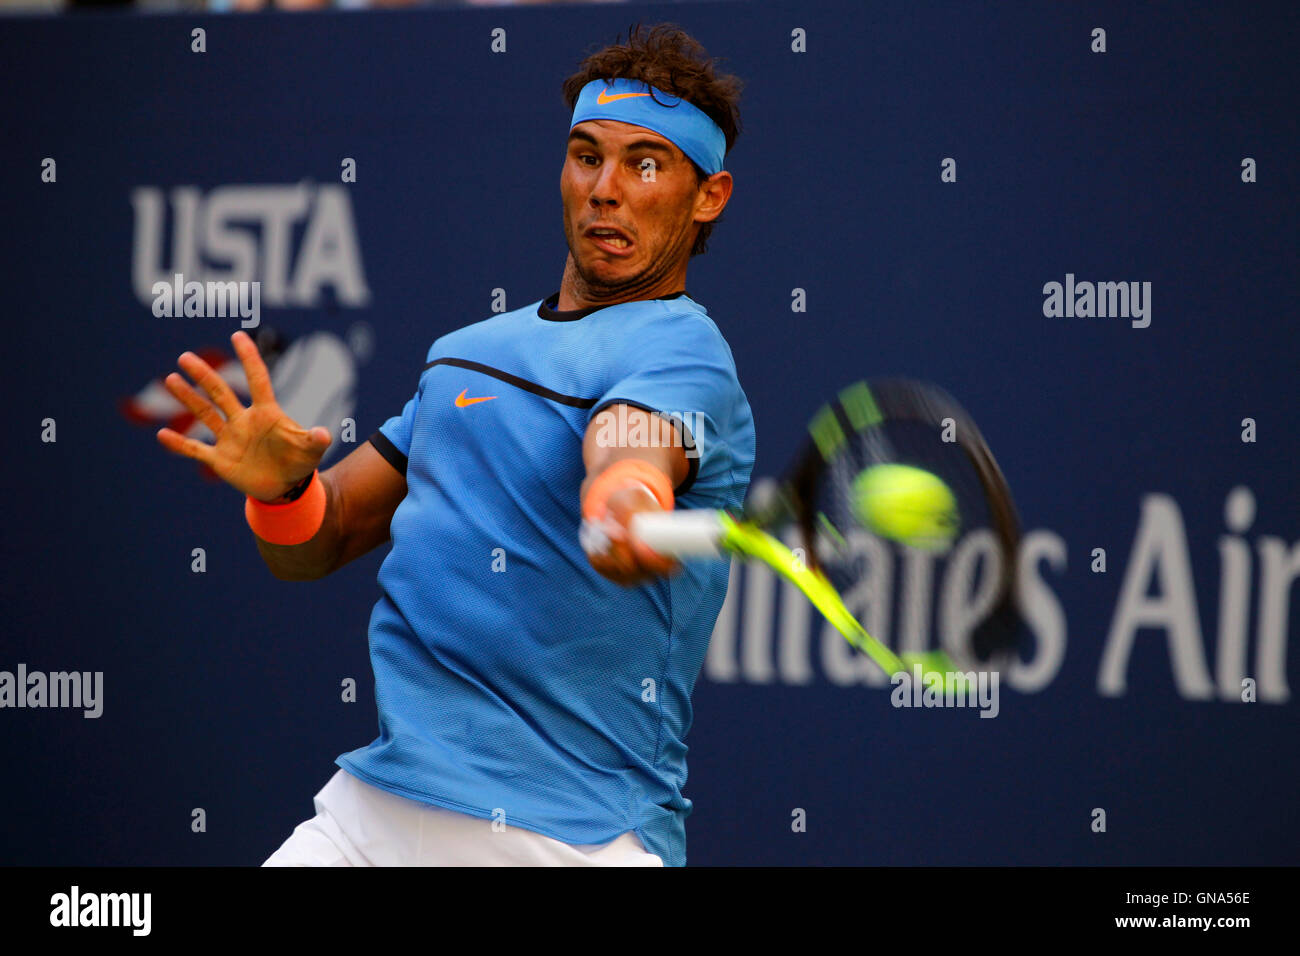 New York, USA. 29th Aug, 2016. Spain's Rafael Nadal in action during his first round match against Denis Istomin of Uzbekistan in the first round of the U.S. Open Tennis Championships at Flushing Meadows, New York on Monday, August 29th. Credit:  Adam Stoltman/Alamy Live News Stock Photo